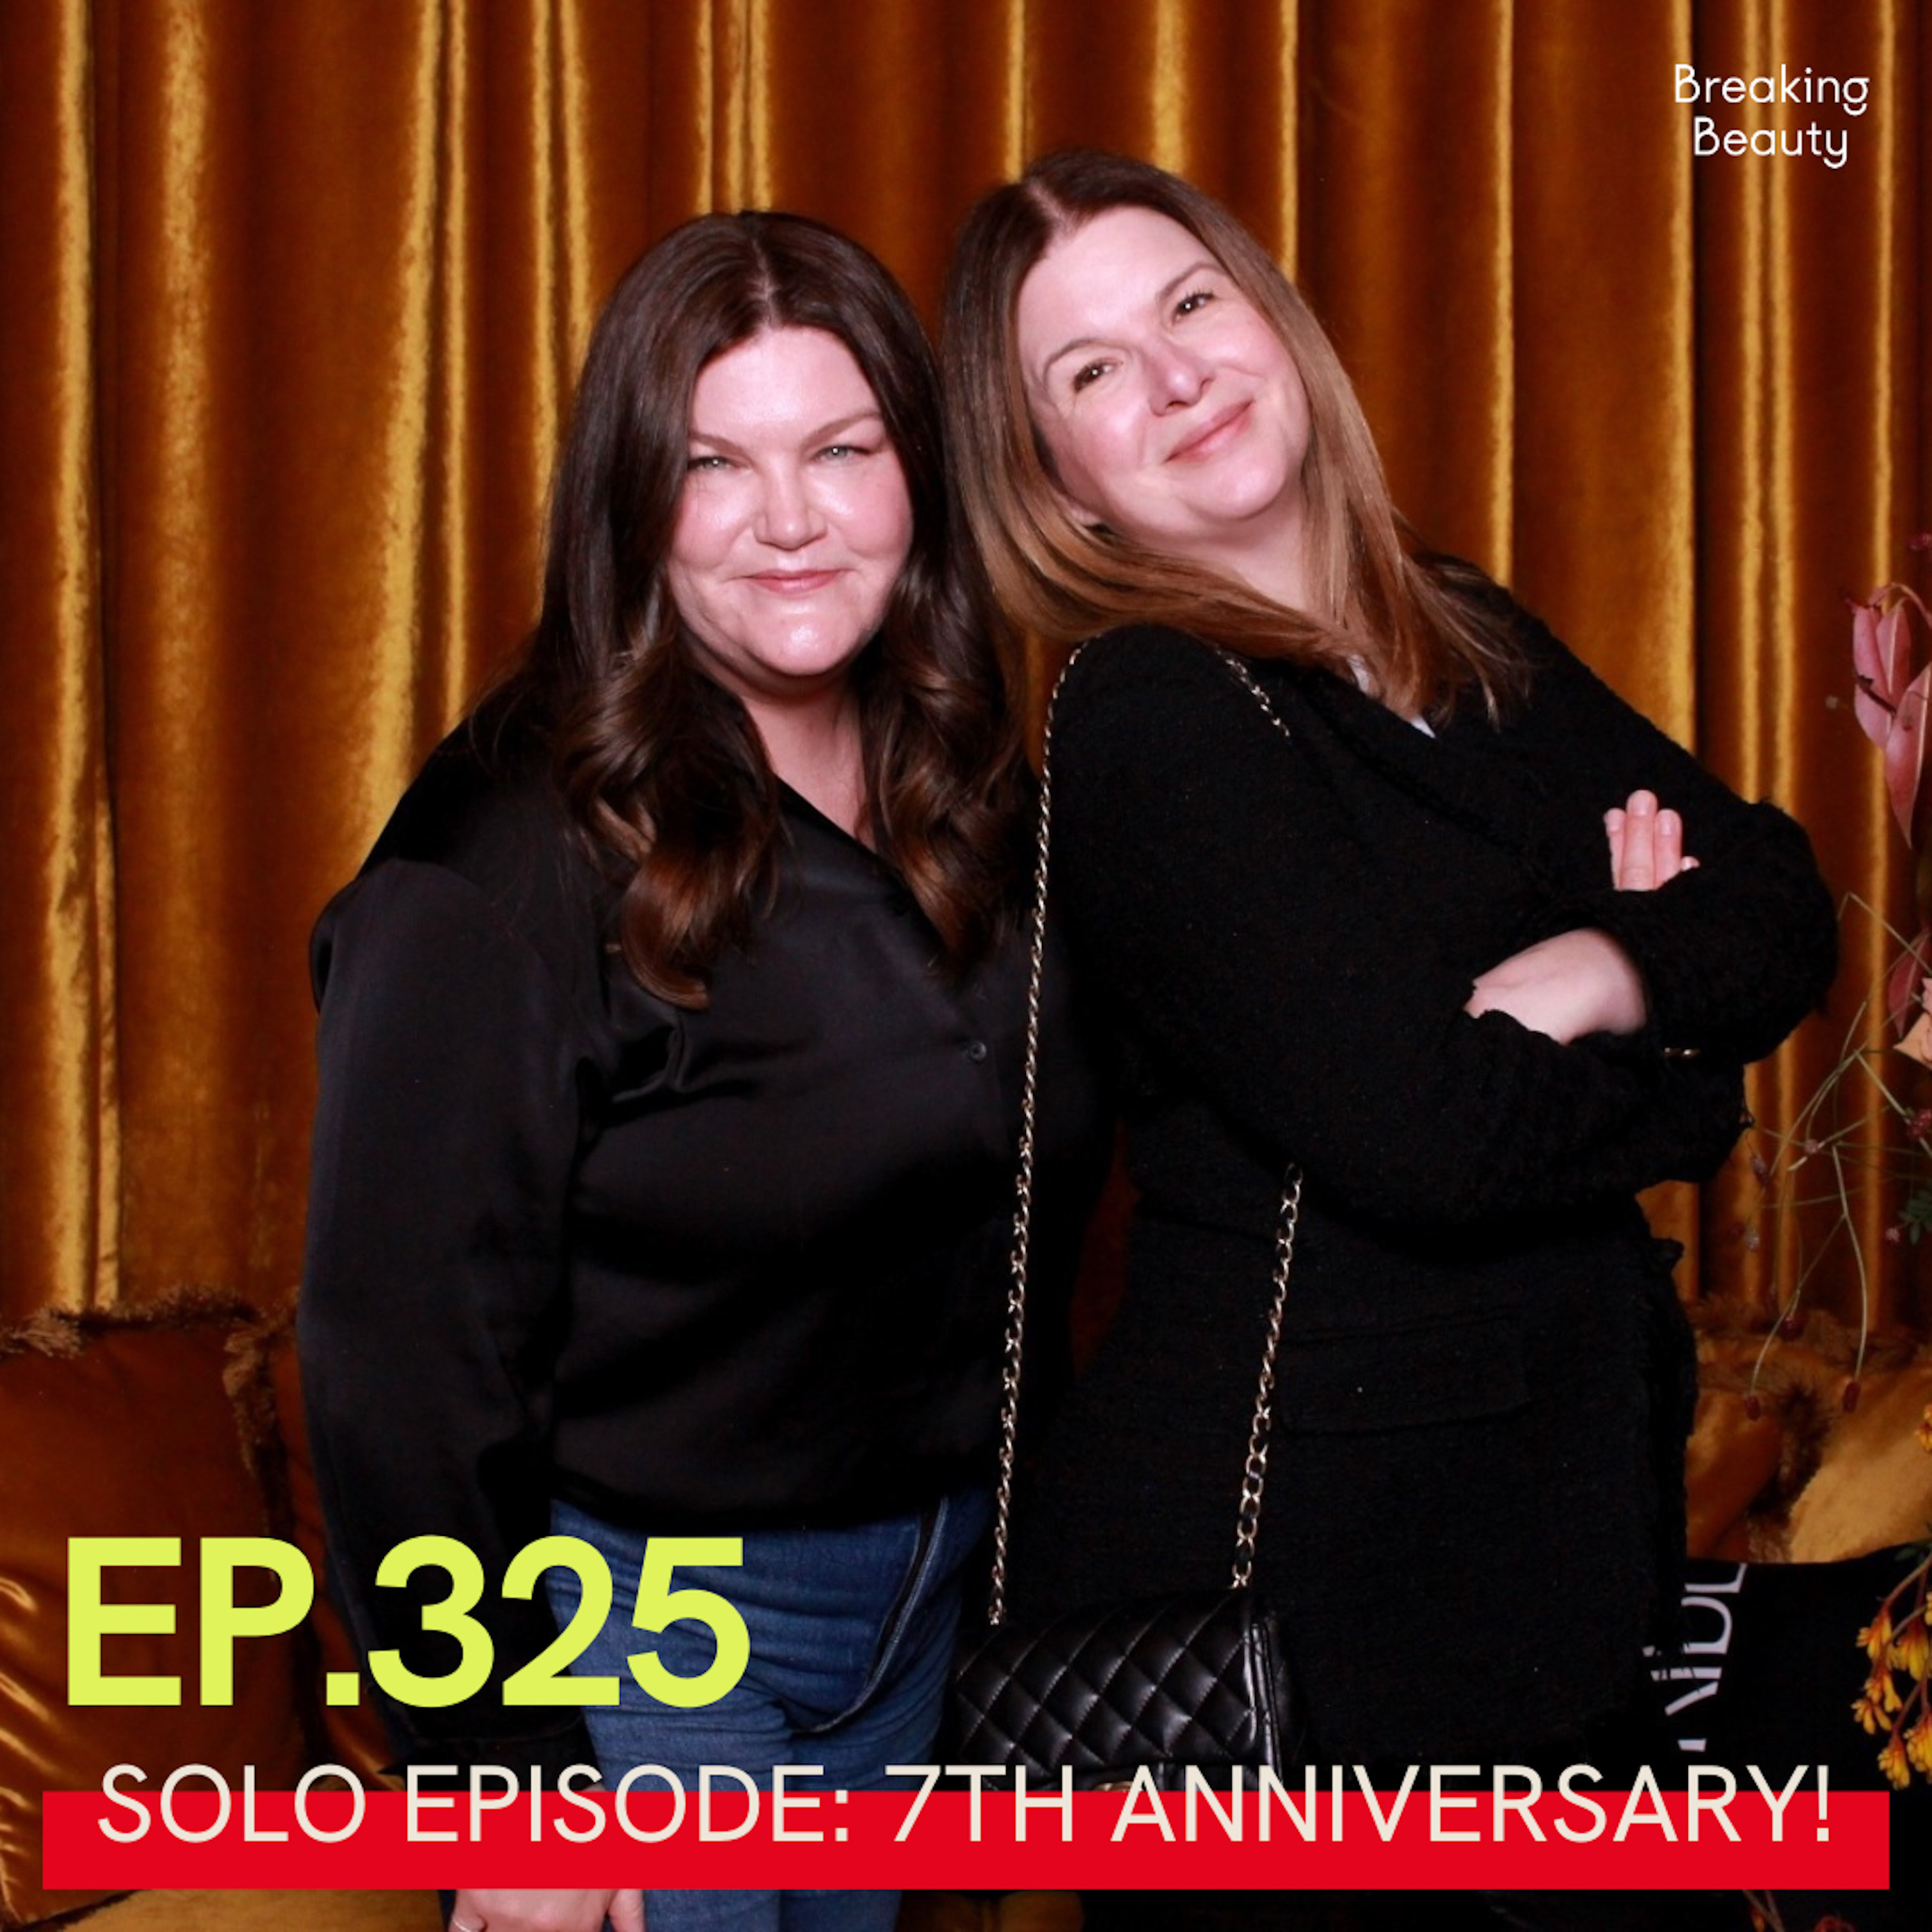 Solo Episode! Celebrating Our 7th Anniversary, Revealing Our Top 10 Episodes Ever and Fashion’s Middle-Age Takeover